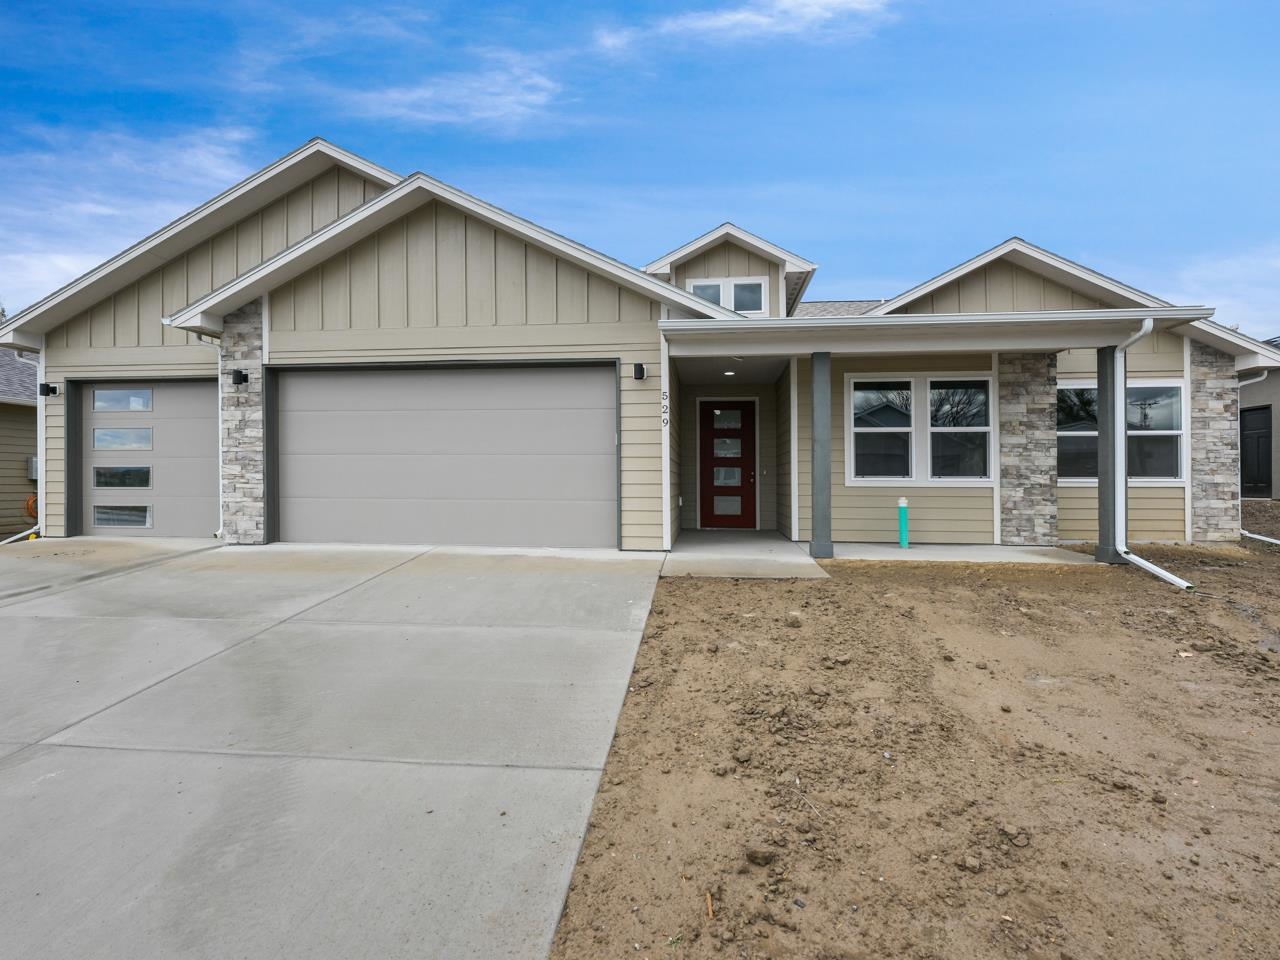 Welcome to the Desert Peach Subdivision, a beautiful collection of 2022 new construction homes in Clifton, CO.  Quality construction by local North Peak Construction, and located near farms, orchards, and wineries. In fact, you can jump on the famous Fruit and Wine Byway just 1/2 mile from this home, and ride, walk, or drive around Palisade and East Orchard Mesa's amazing orchards and vineyards. High end and on-trend finishes throughout the home including quartz counters, 9' ceilings, kitchen islands, modern designs and lighting, and open concept living spaces. Just moments away from Grand Junction, Palisade, and all the adventure the Grand Valley has to offer, this new neighborhood has something for everyone. Reach out to ask about what homes are available today! *Photos are not of actual home, but show floor plan and quality of finishes in a similar home in the development. Floating shelves, certain lighting fixtures, dual shower heads, fireplaces, and the cabinets in the laundry/garage are all upgrades. Please reach out to listing agent to see if this home has the desired upgrades available.